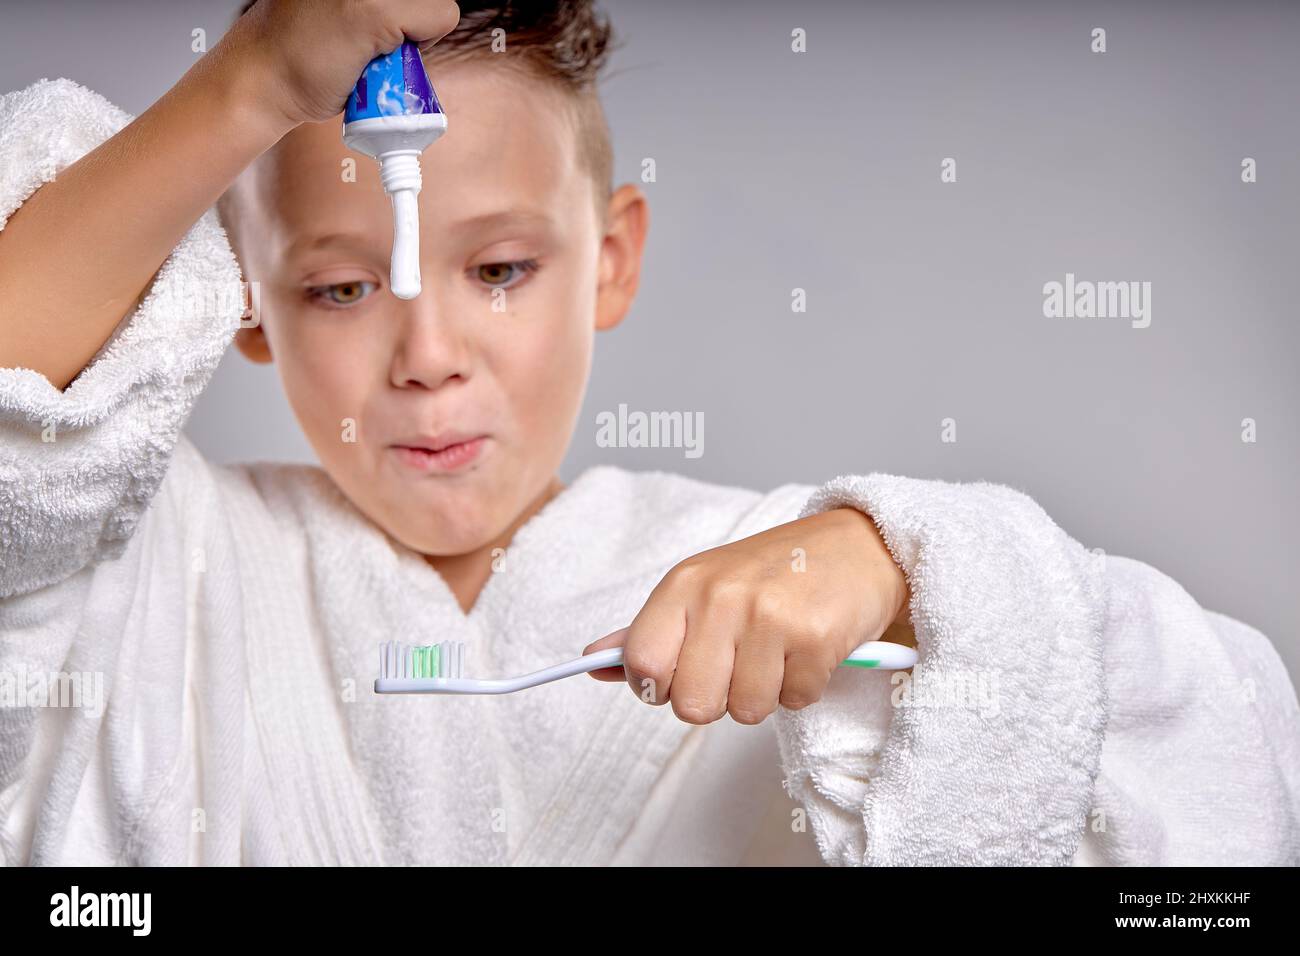 emotional Child going to brush teeth, applying paste on tooth brush, wearing bathrobe in the morning. Dental hygiene and health for children. isolated Stock Photo